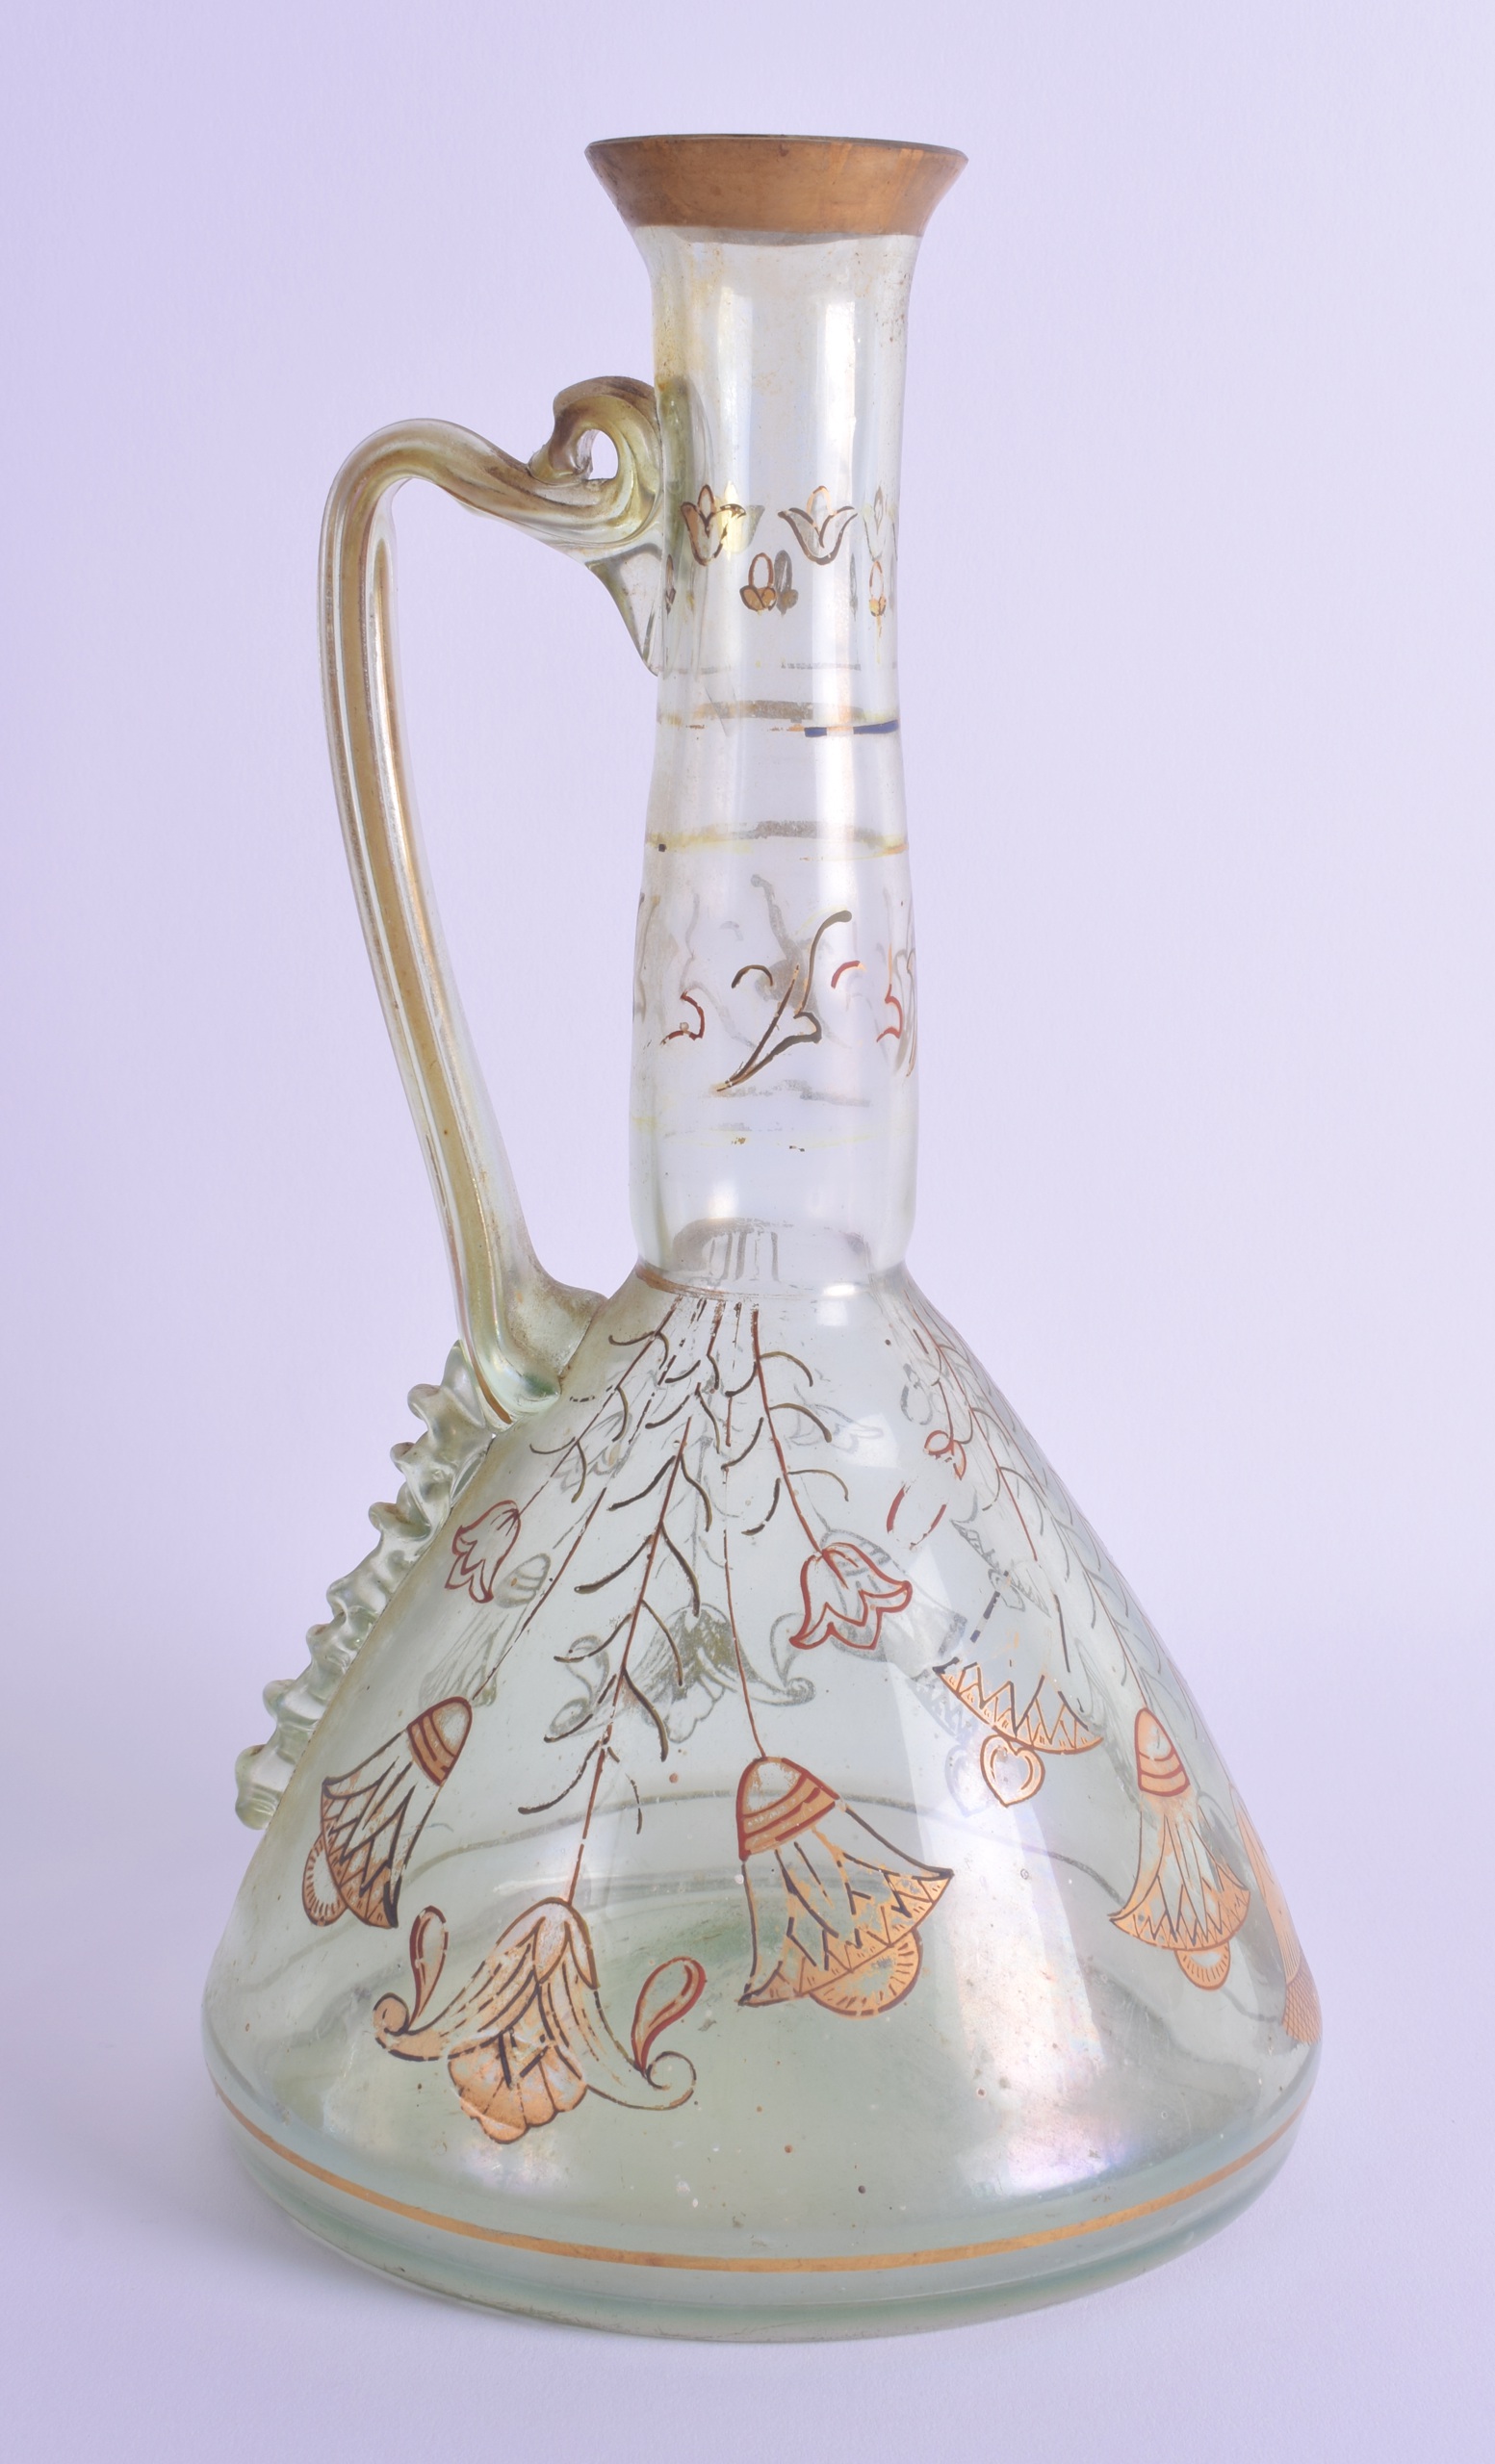 AN ART NOUVEAU GERMAN FRITZ HECKERT ENAMELLED GLASS EWER C1890 painted with swags and floral sprays. - Bild 2 aus 2